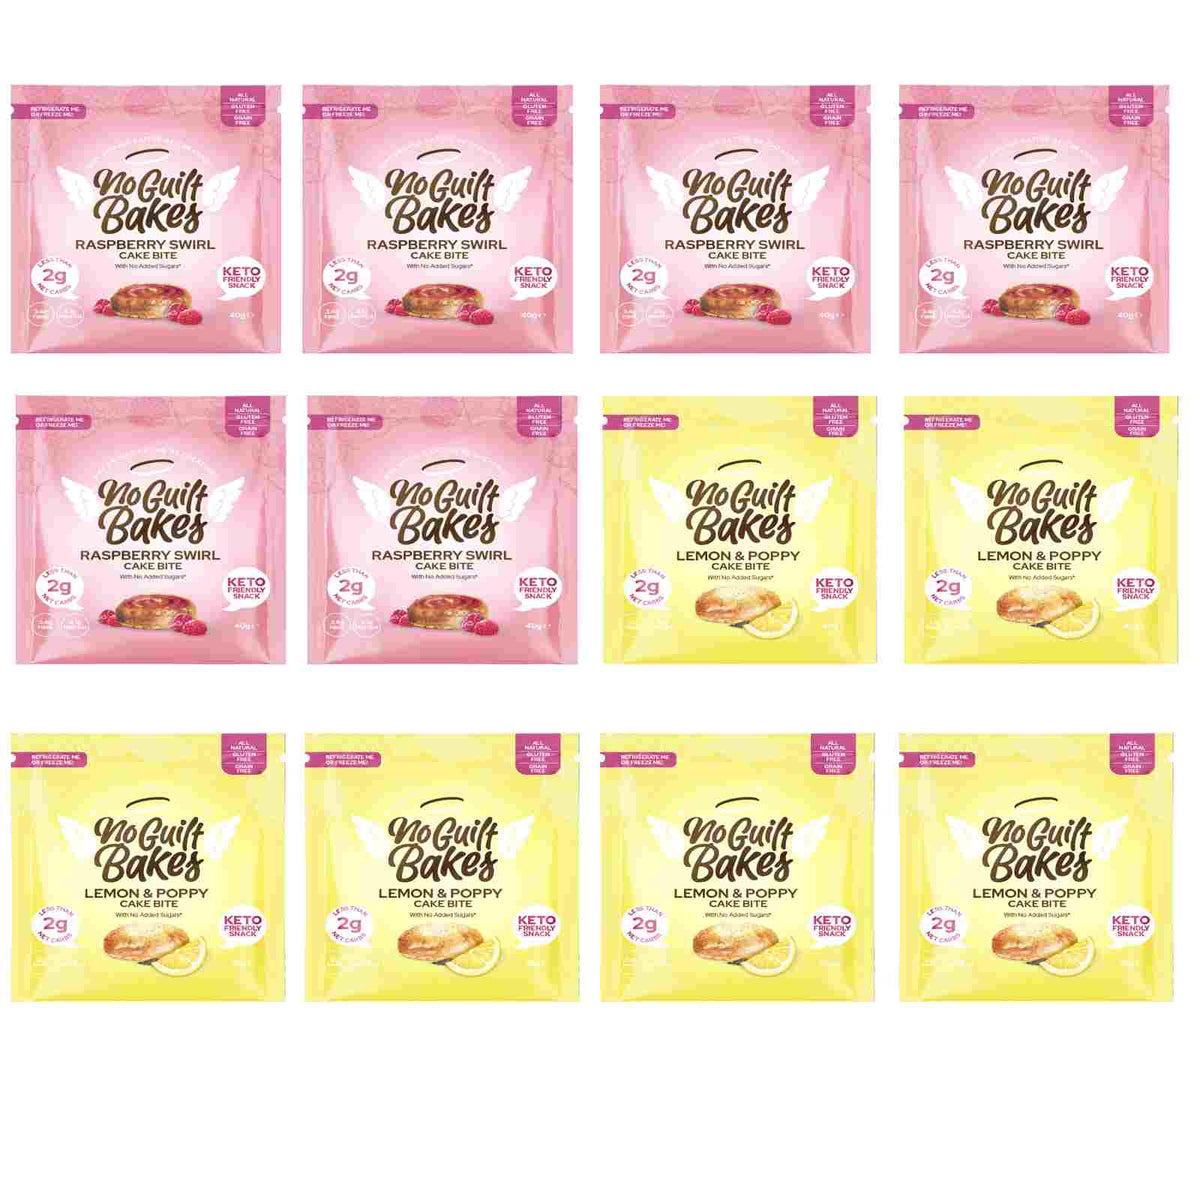 A group of packages with different flavors of cookies, including lemon &amp; poppy seed and raspberry swirls from No Guilt Bakes&#39; Fruity Variety Cake Bite Pack | Keto.